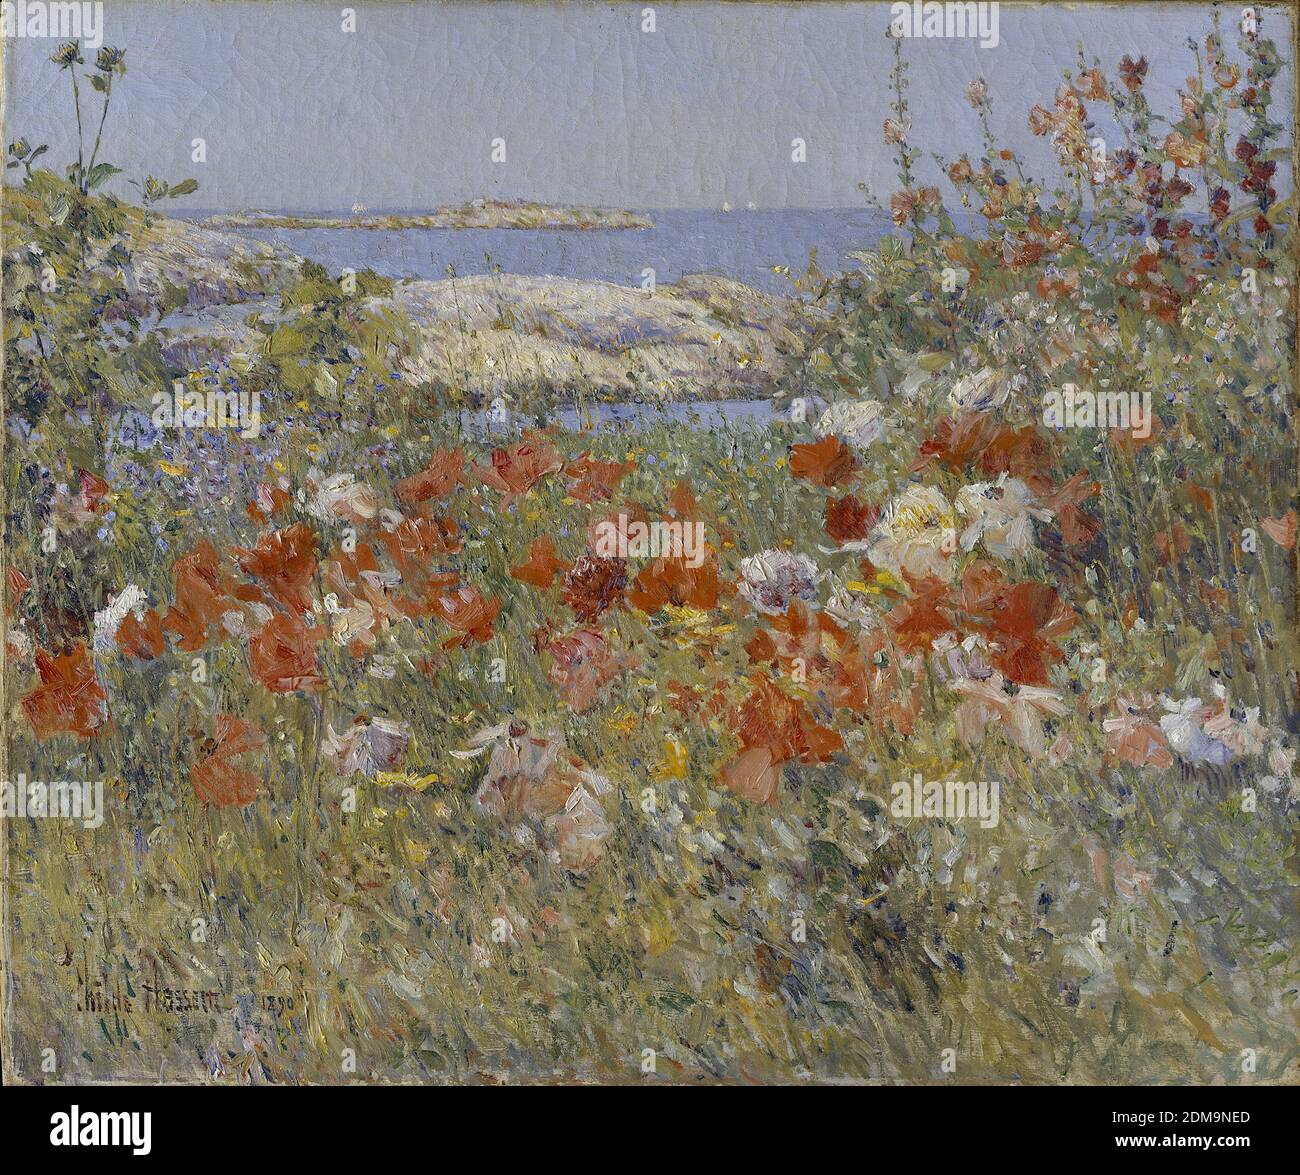 Celia Thaxter's Garden, Isles of Shoals, Maine, 1890 American Impressionist Painting by Childe Hassam - Very high resolution and quality image Stock Photo